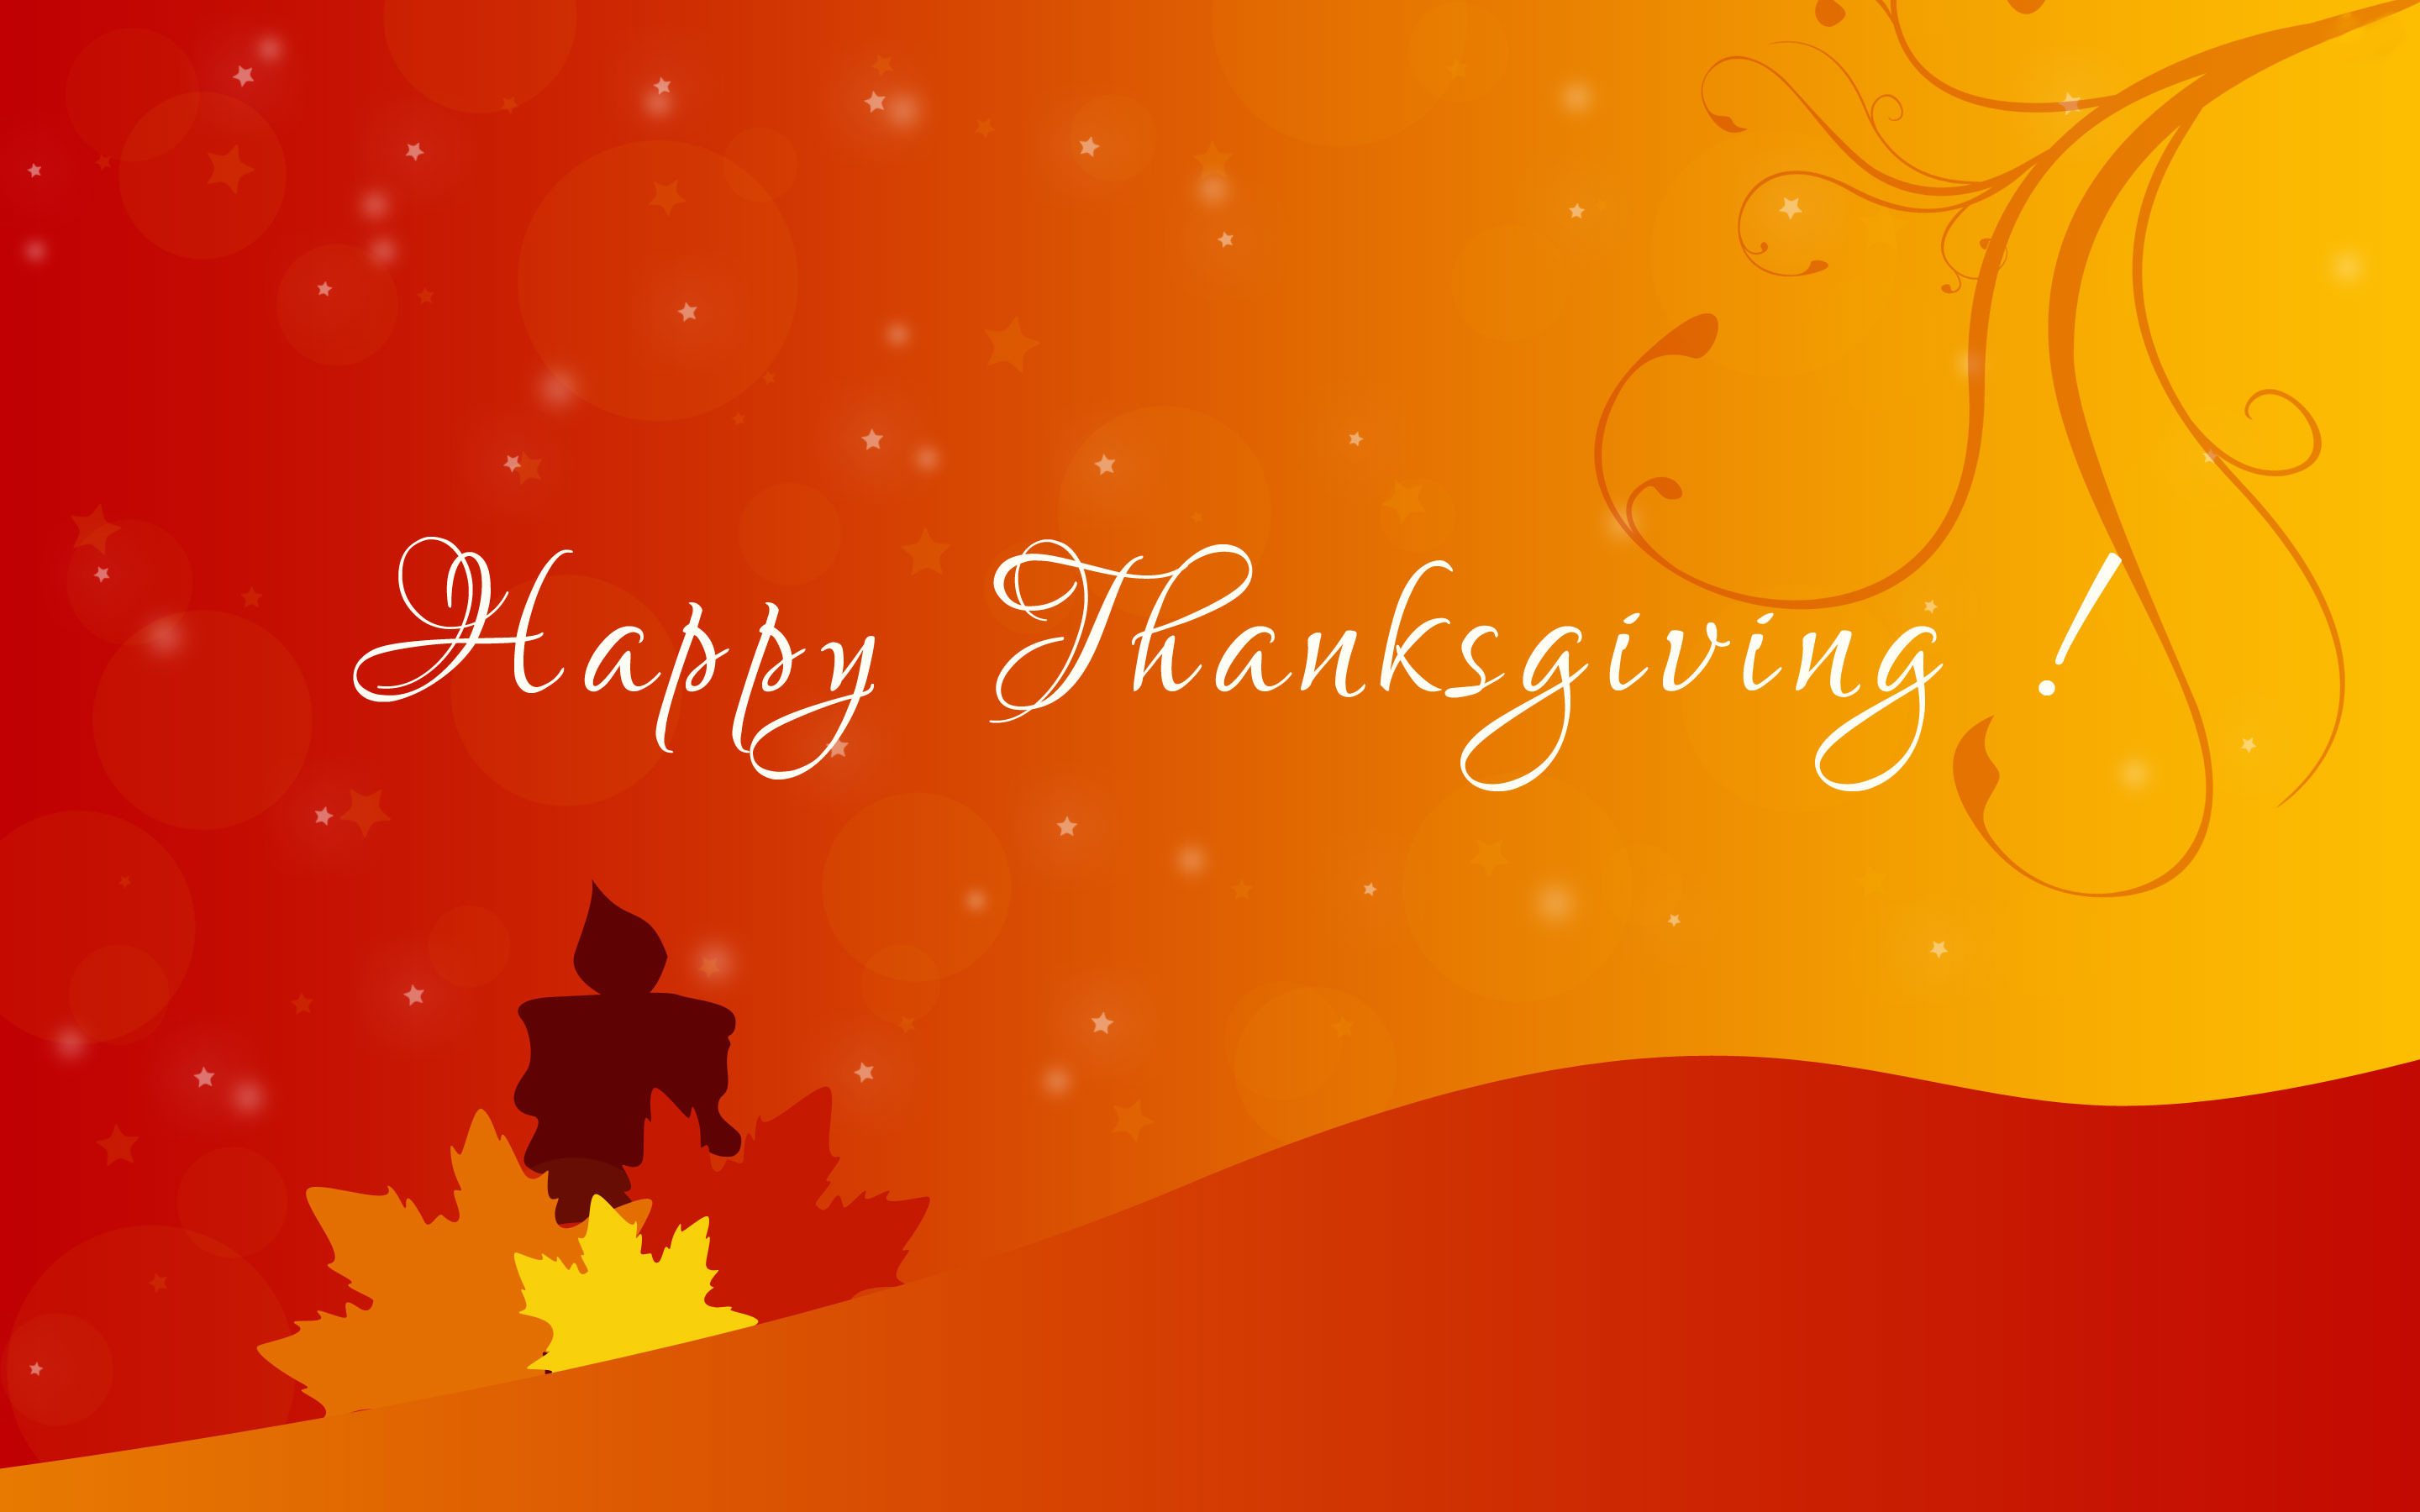 Free Thanksgiving Wallpapers HD 2016 Download Wallpapers